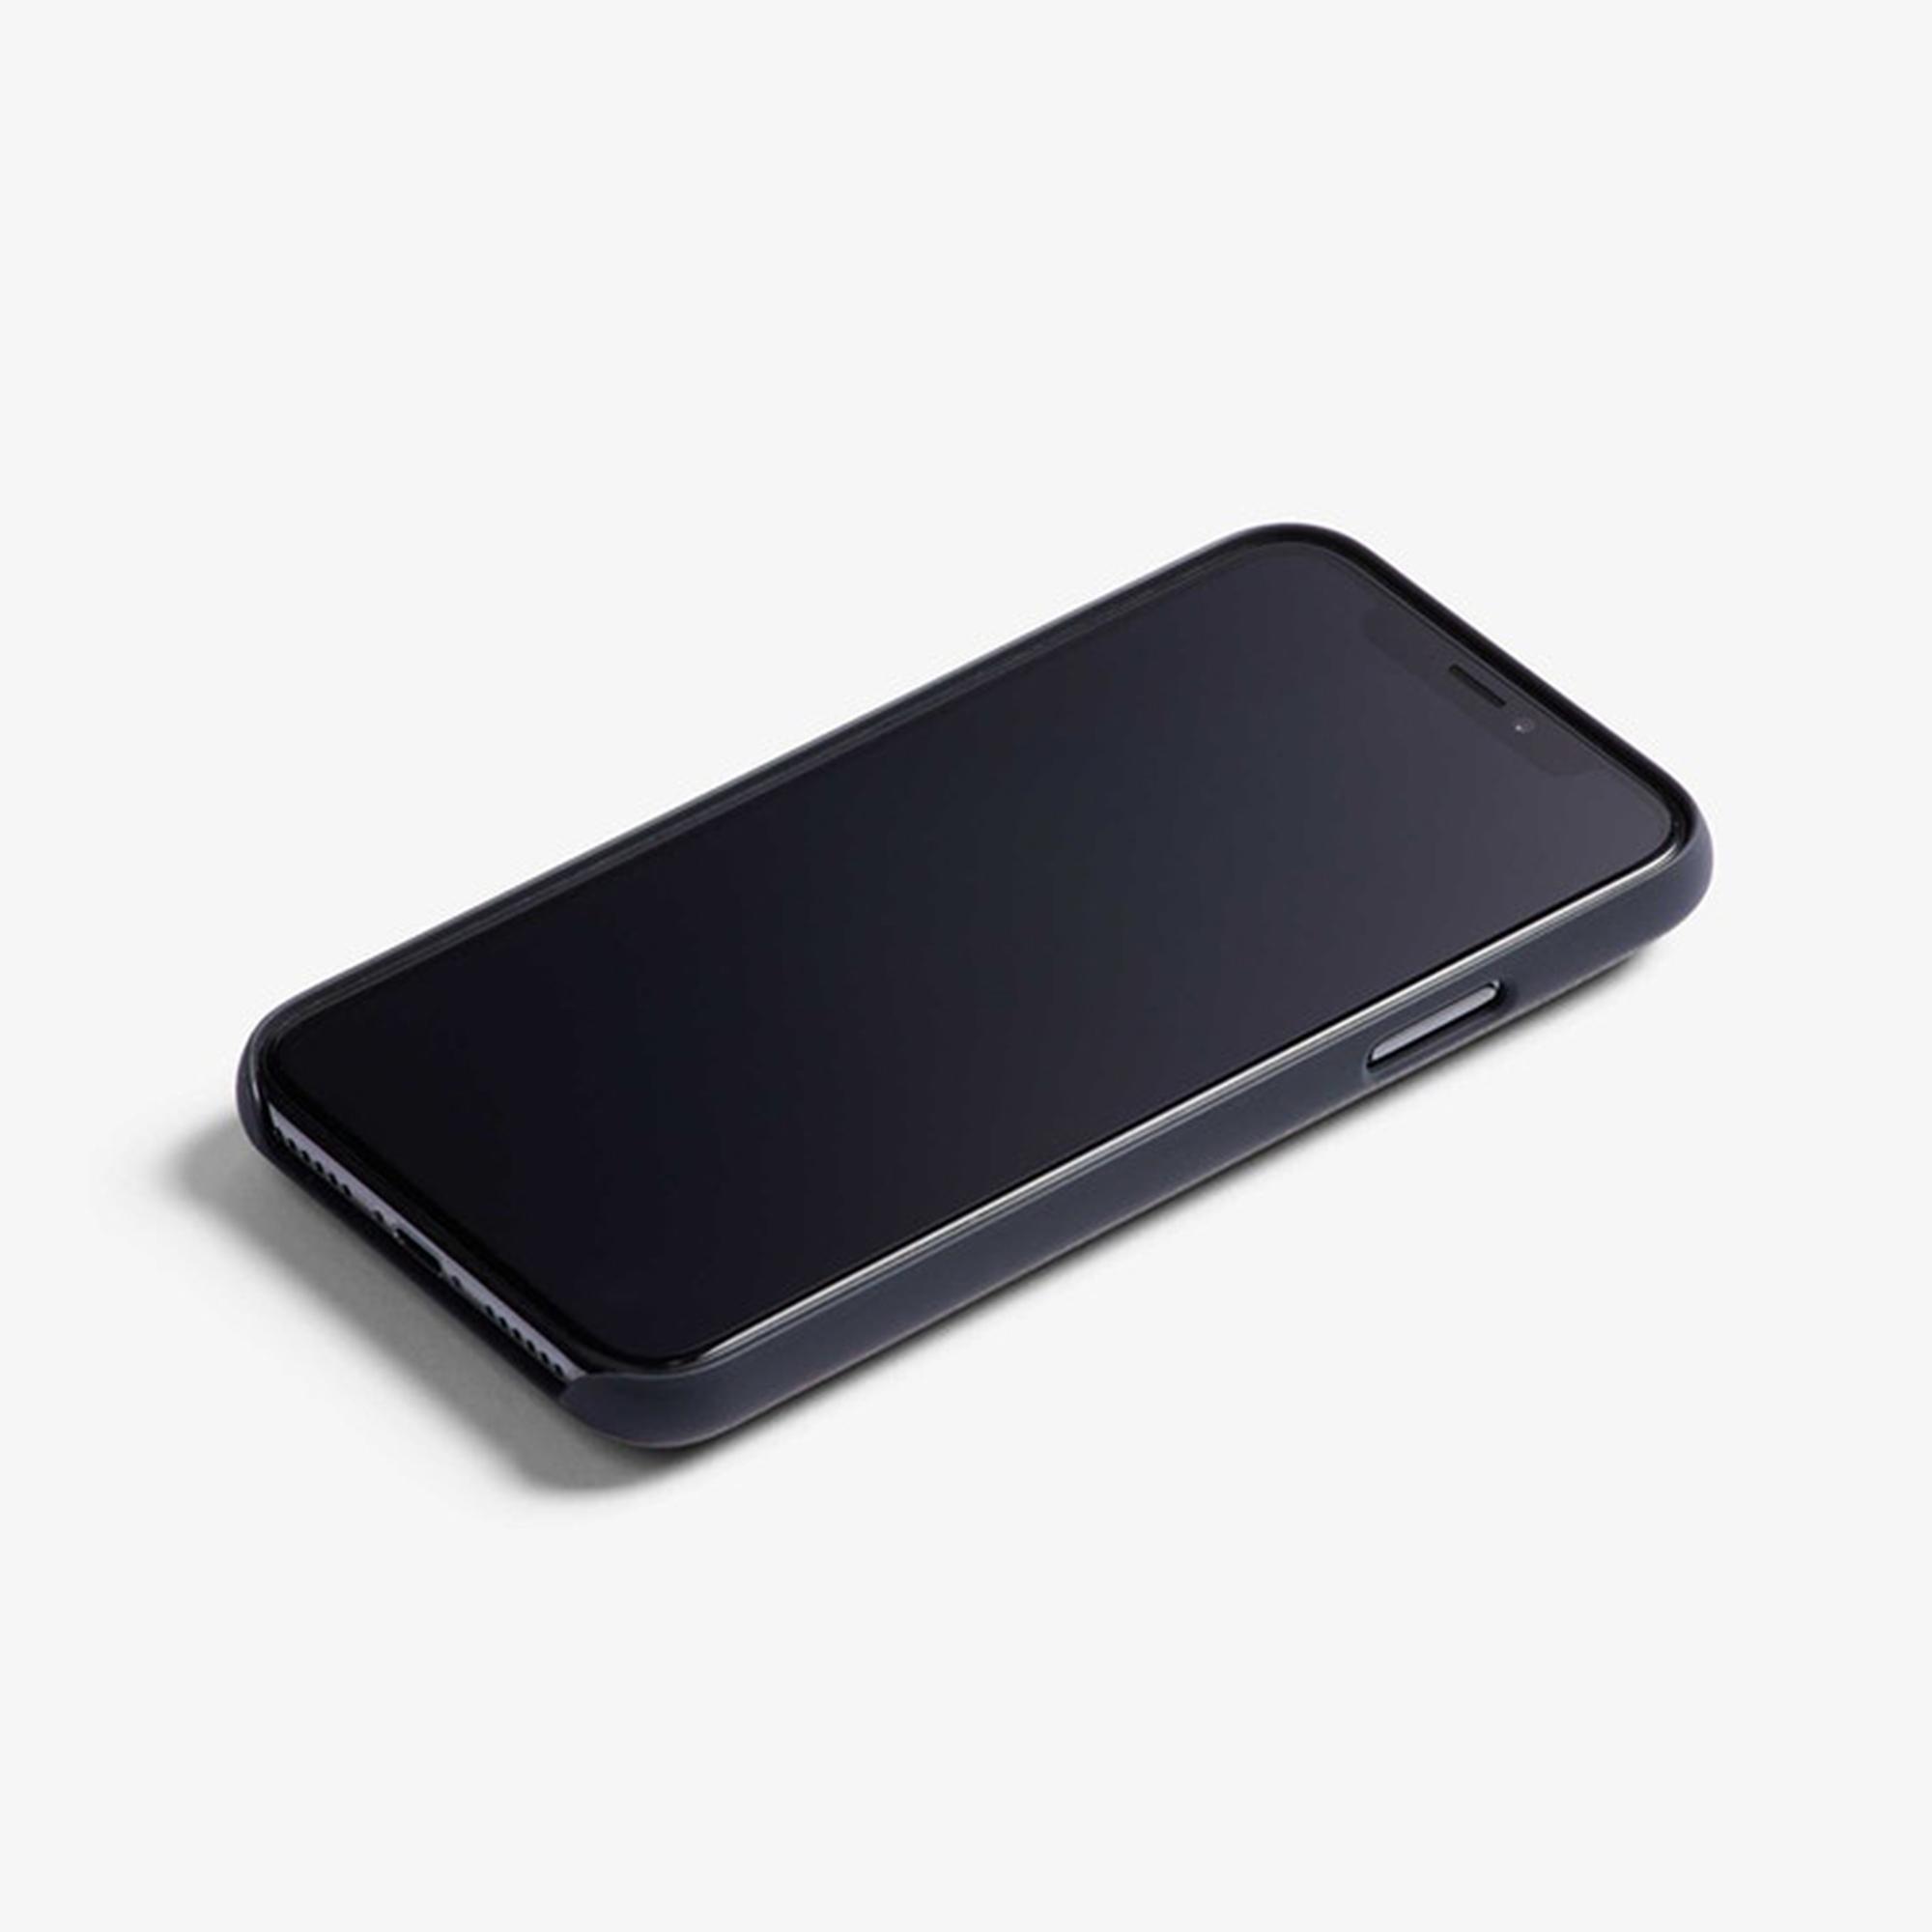 Bellroy Iphone Xr 3 Card Phone Case Graphite in Gray for